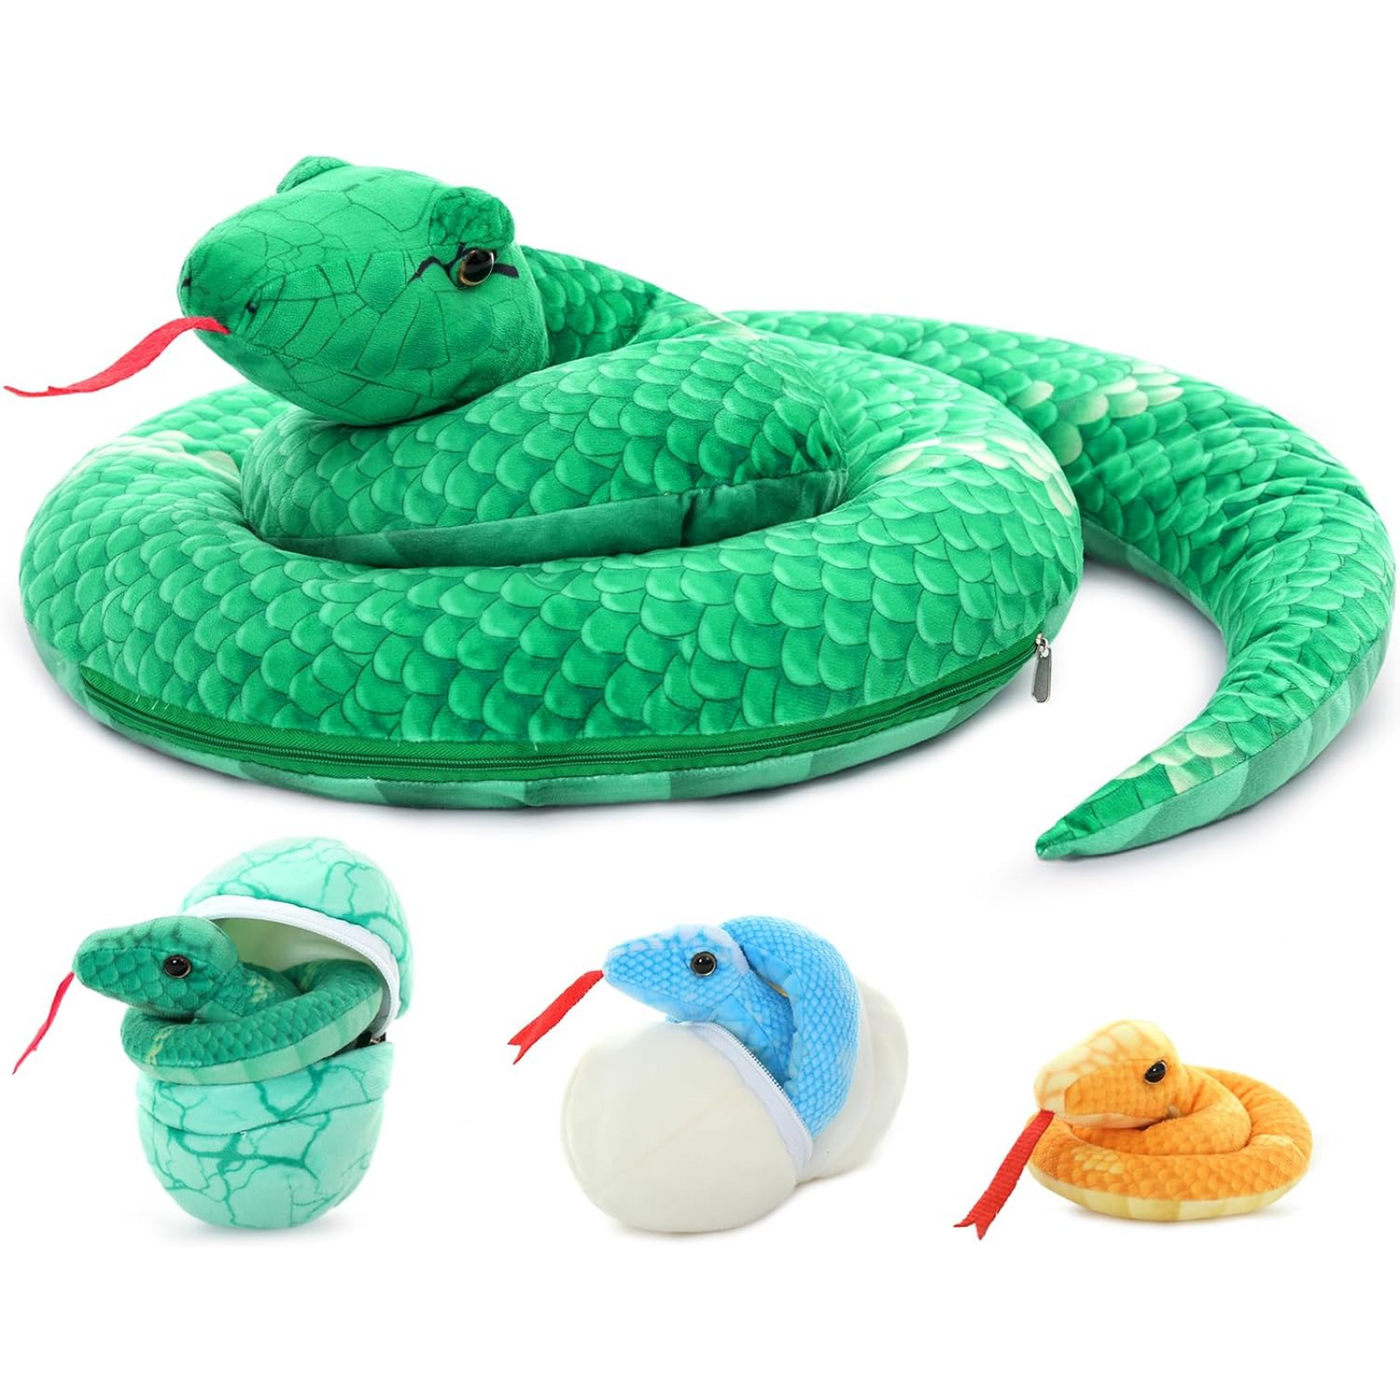 Snake Stuffed Animal Toy Set, Green/Yellow/Red/Pink, 80/79/55 Inches